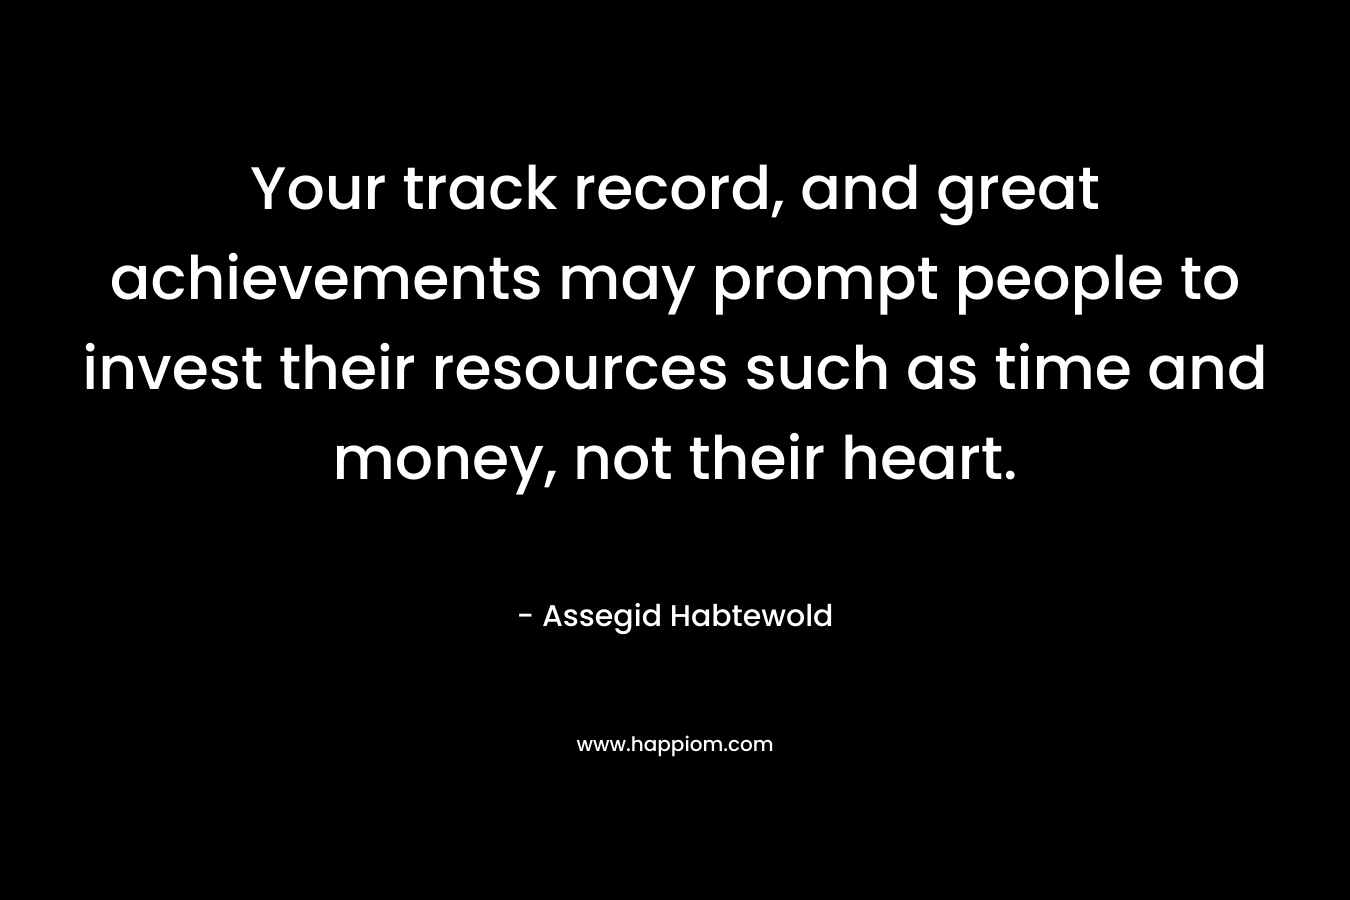 Your track record, and great achievements may prompt people to invest their resources such as time and money, not their heart. – Assegid Habtewold